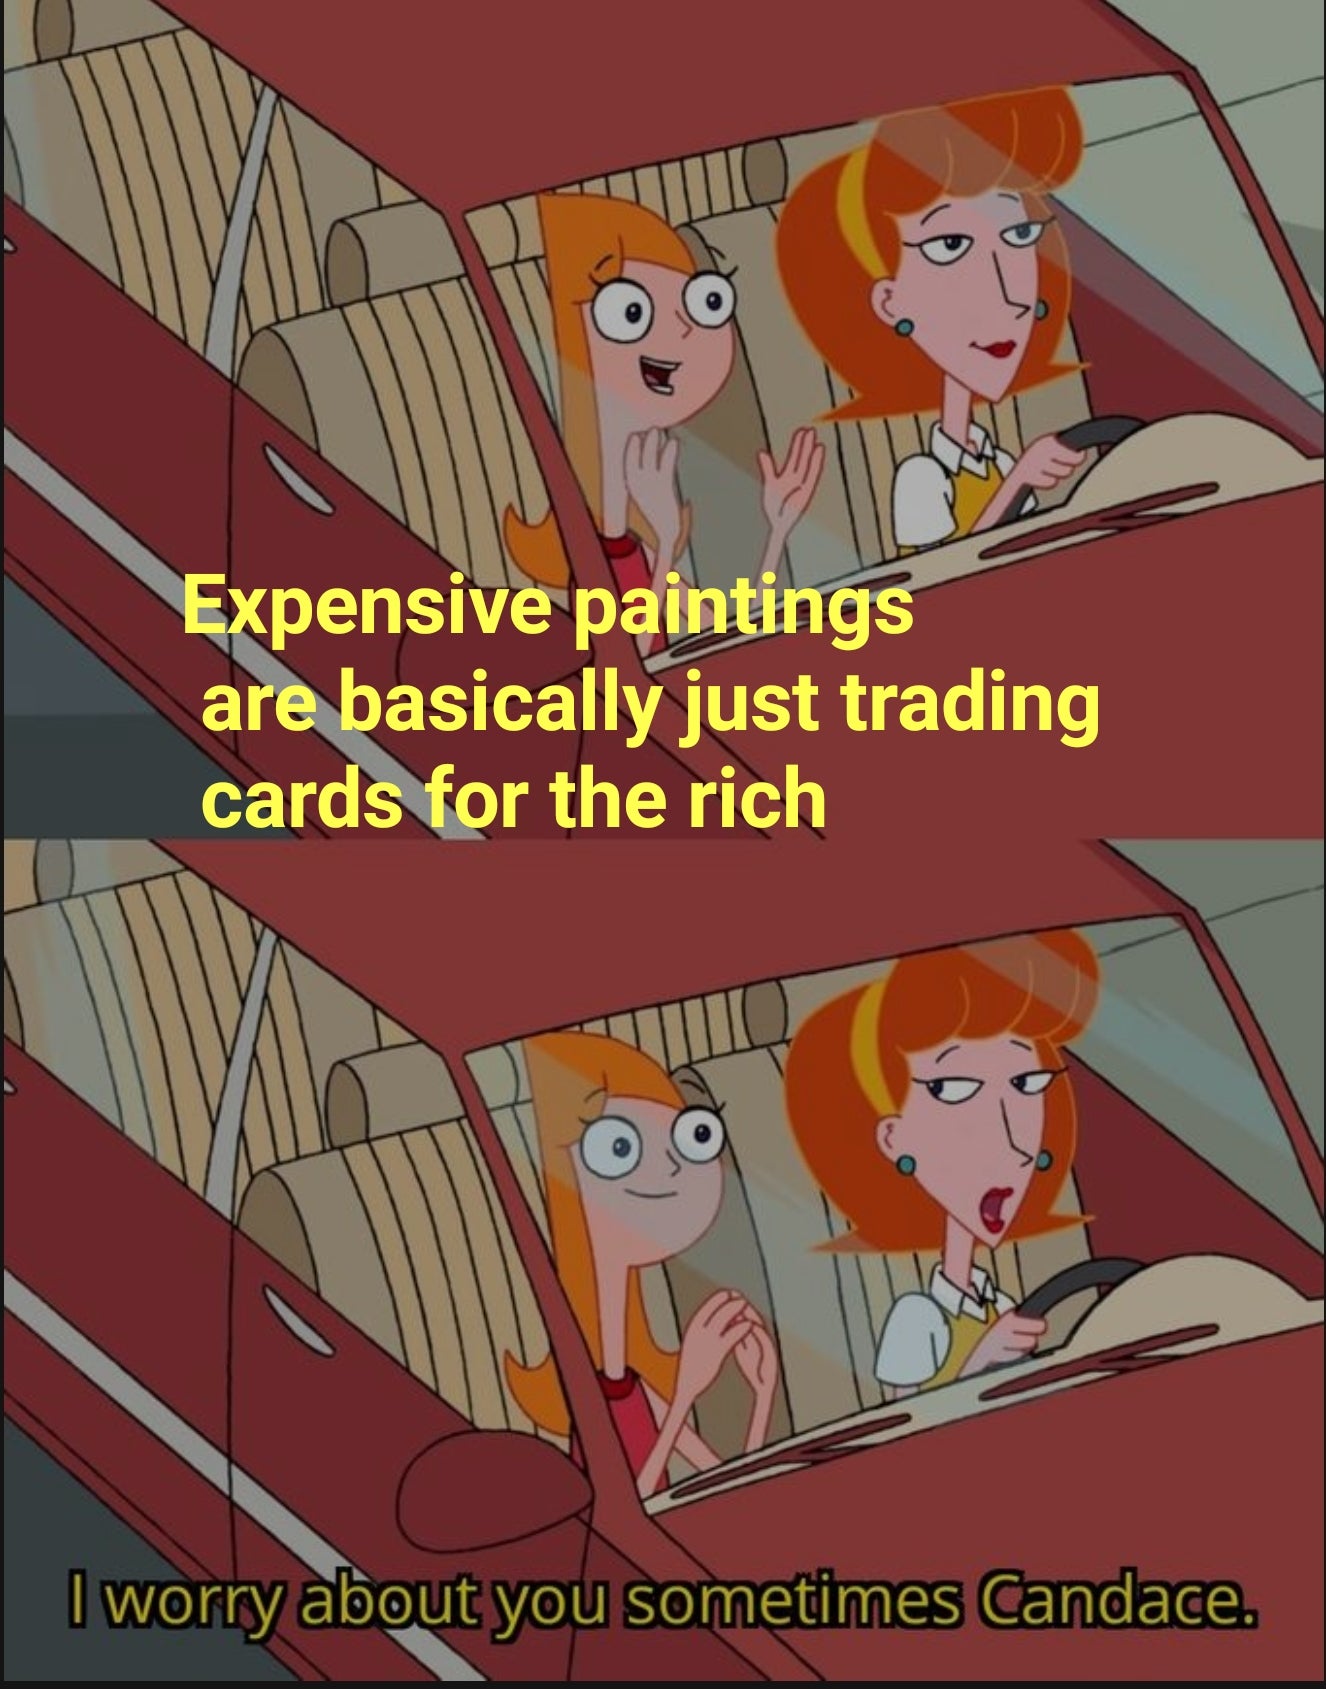 sometimes i worry about you candace meme - Expensive paintings are basically just trading cards for the rich I worry about you sometimes Candace.